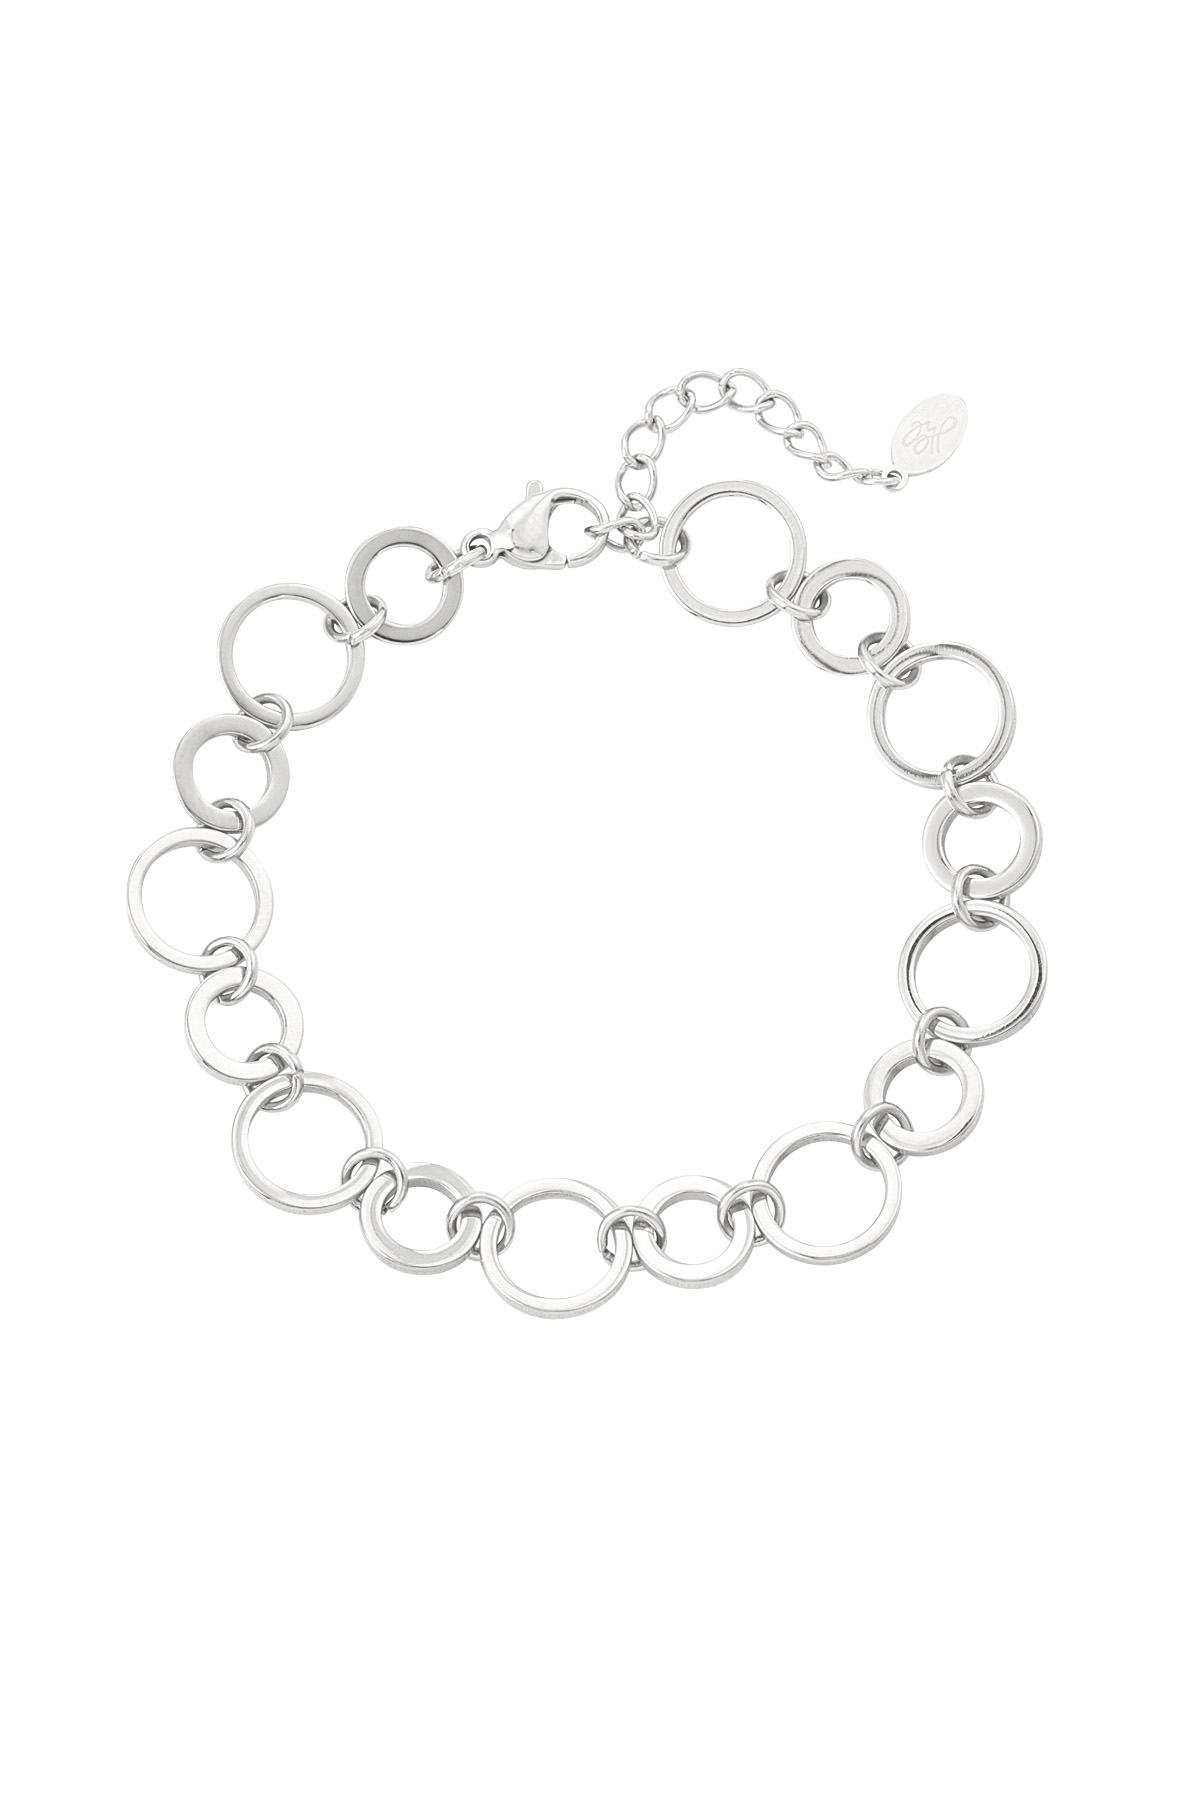 Bracelet small and large links round - silver